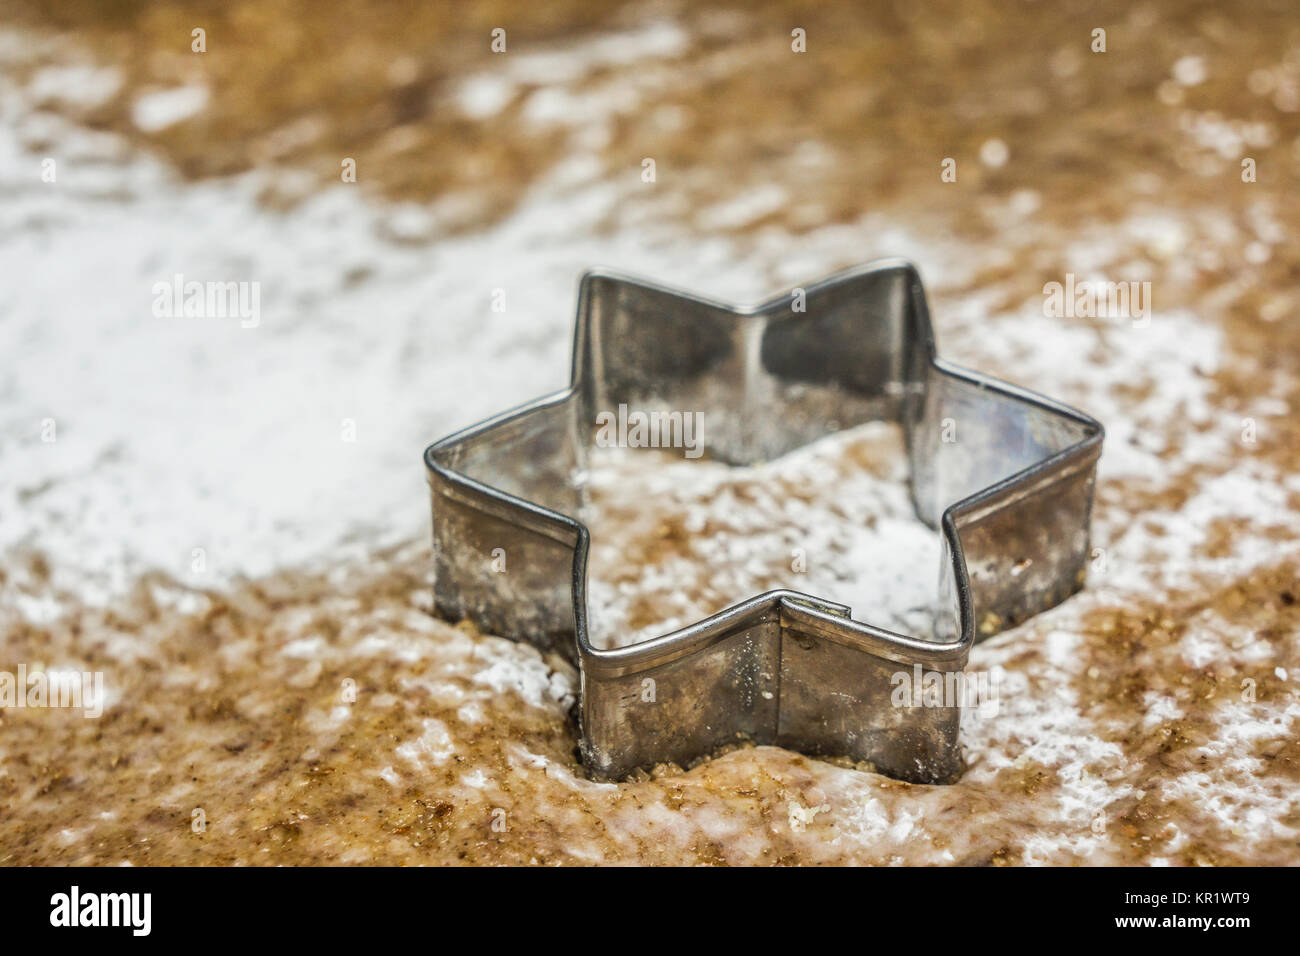 A star shaped pastry cutter on a pastry ready to make traditional christmas cookies. Stock Photo